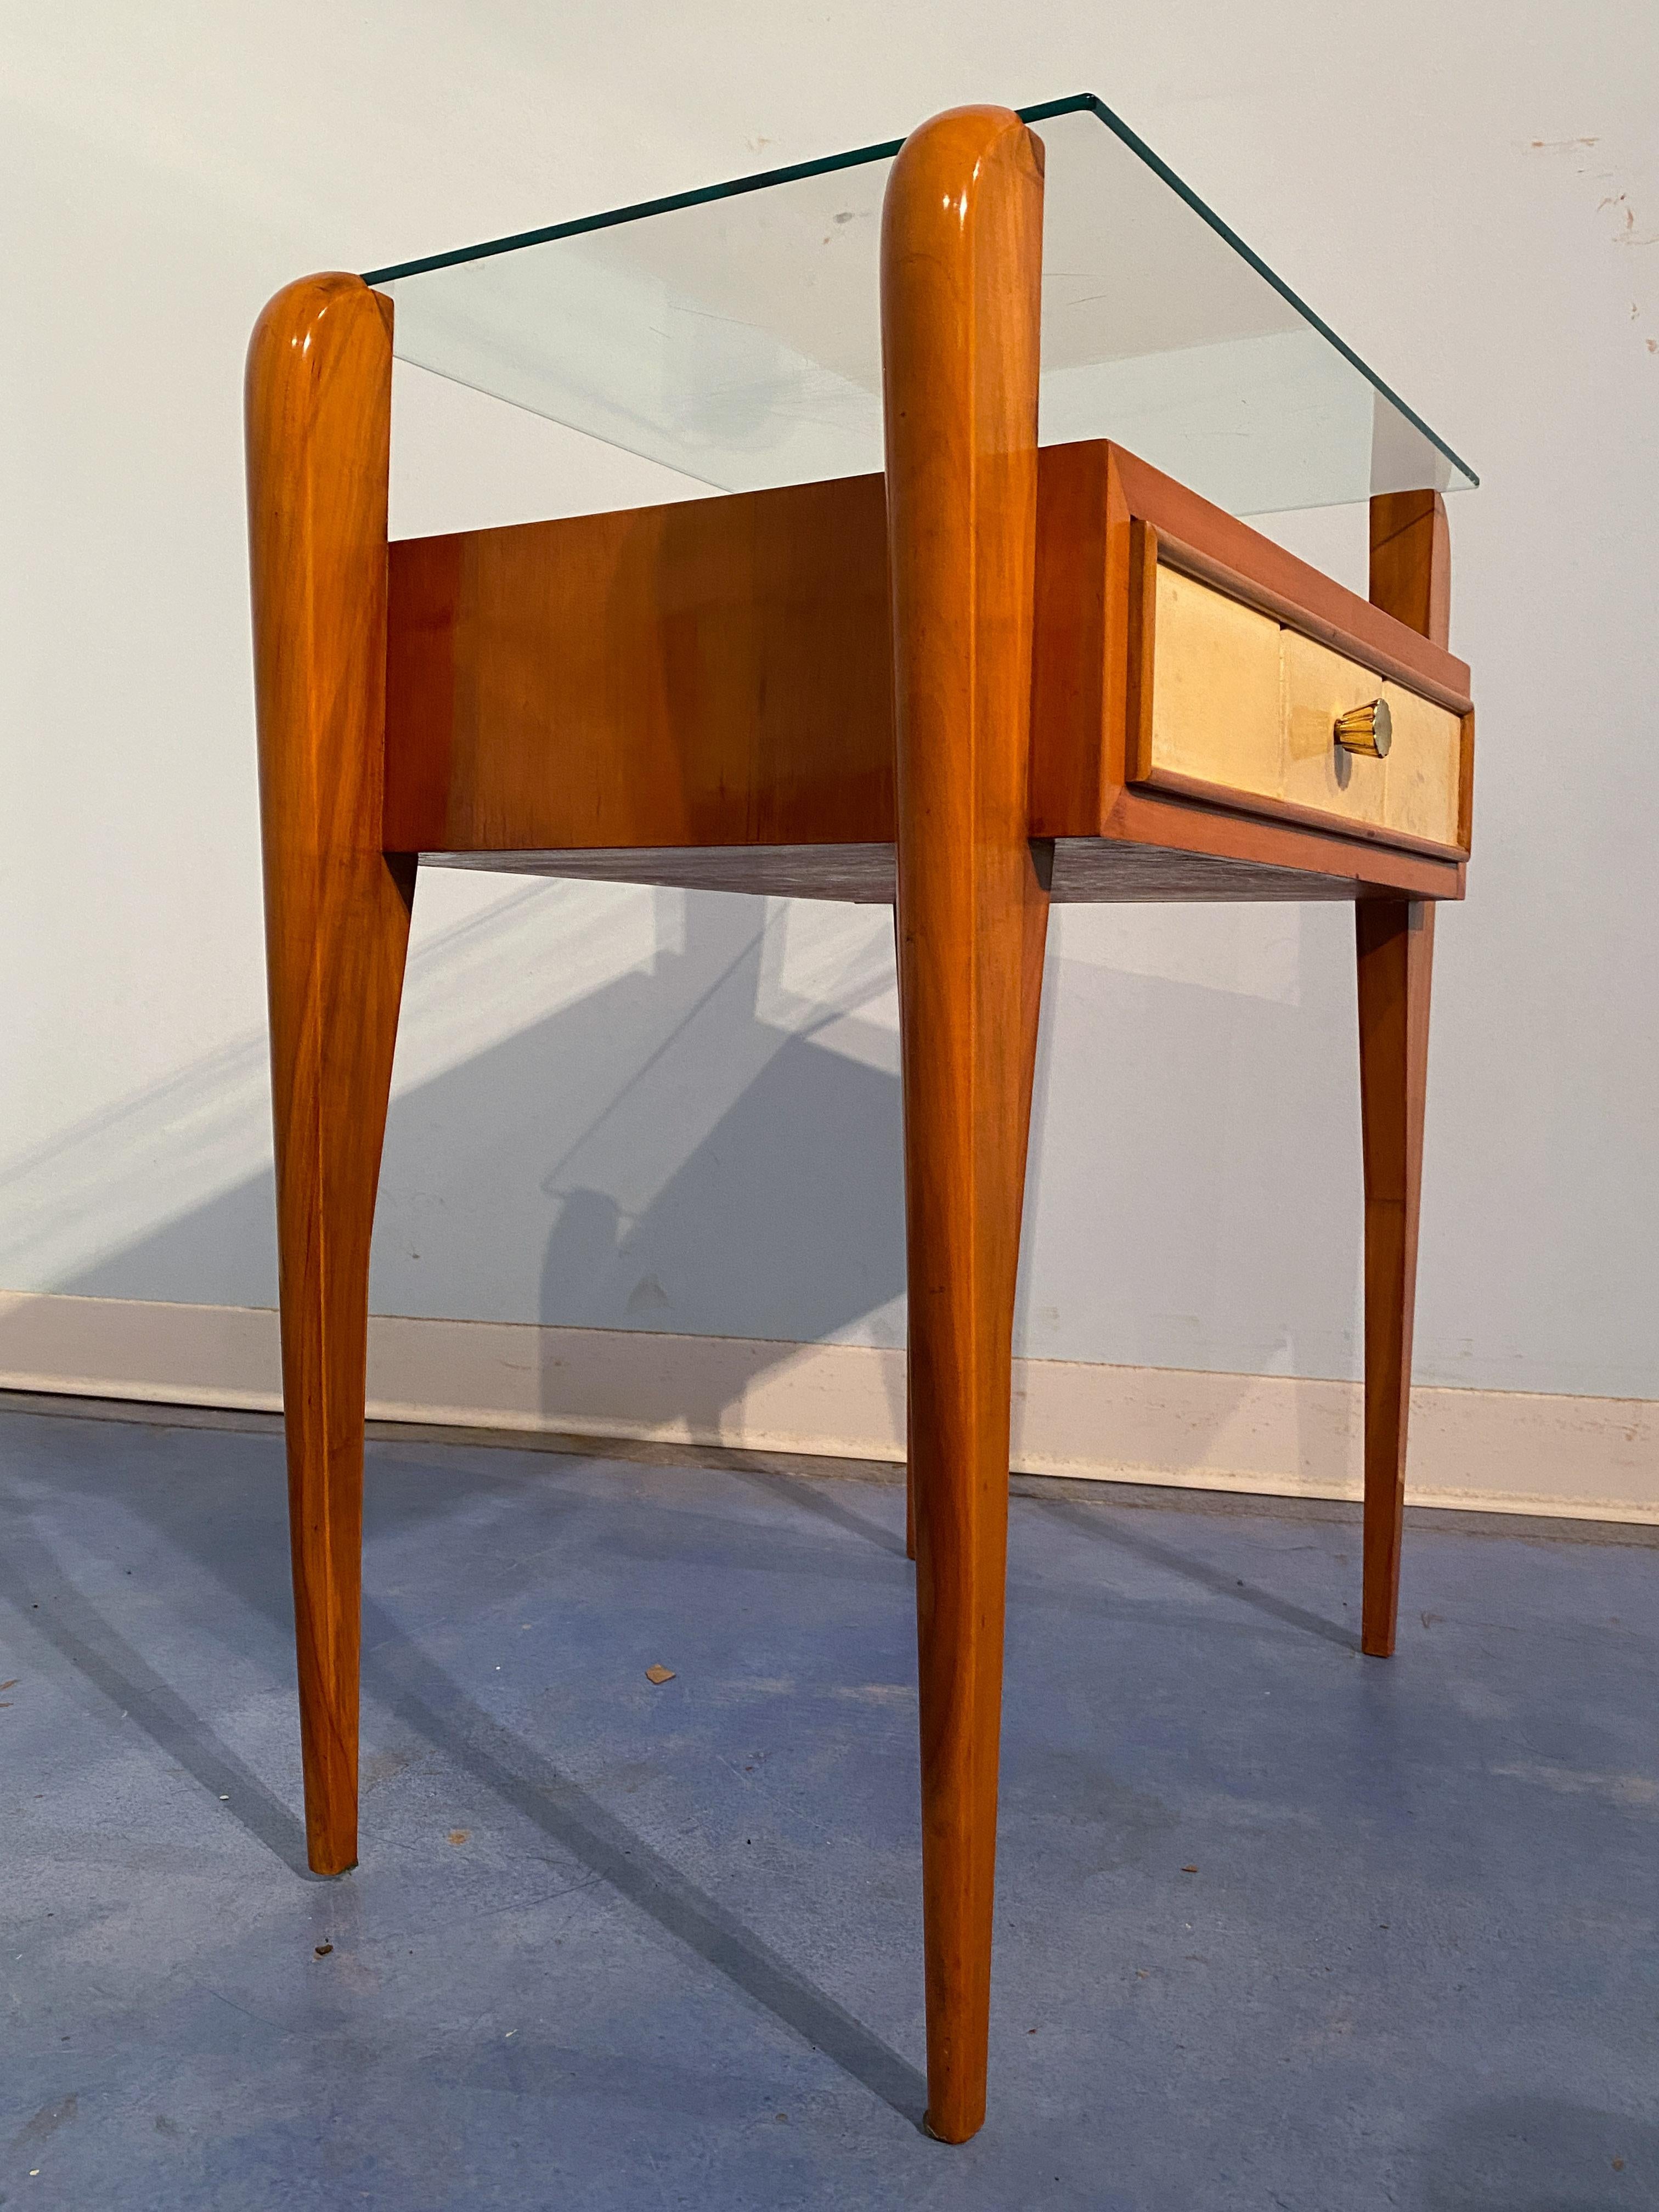 Italian Mid-Century Parchment Bedside or Nightstands by Osvaldo Borsani, 1950 For Sale 4